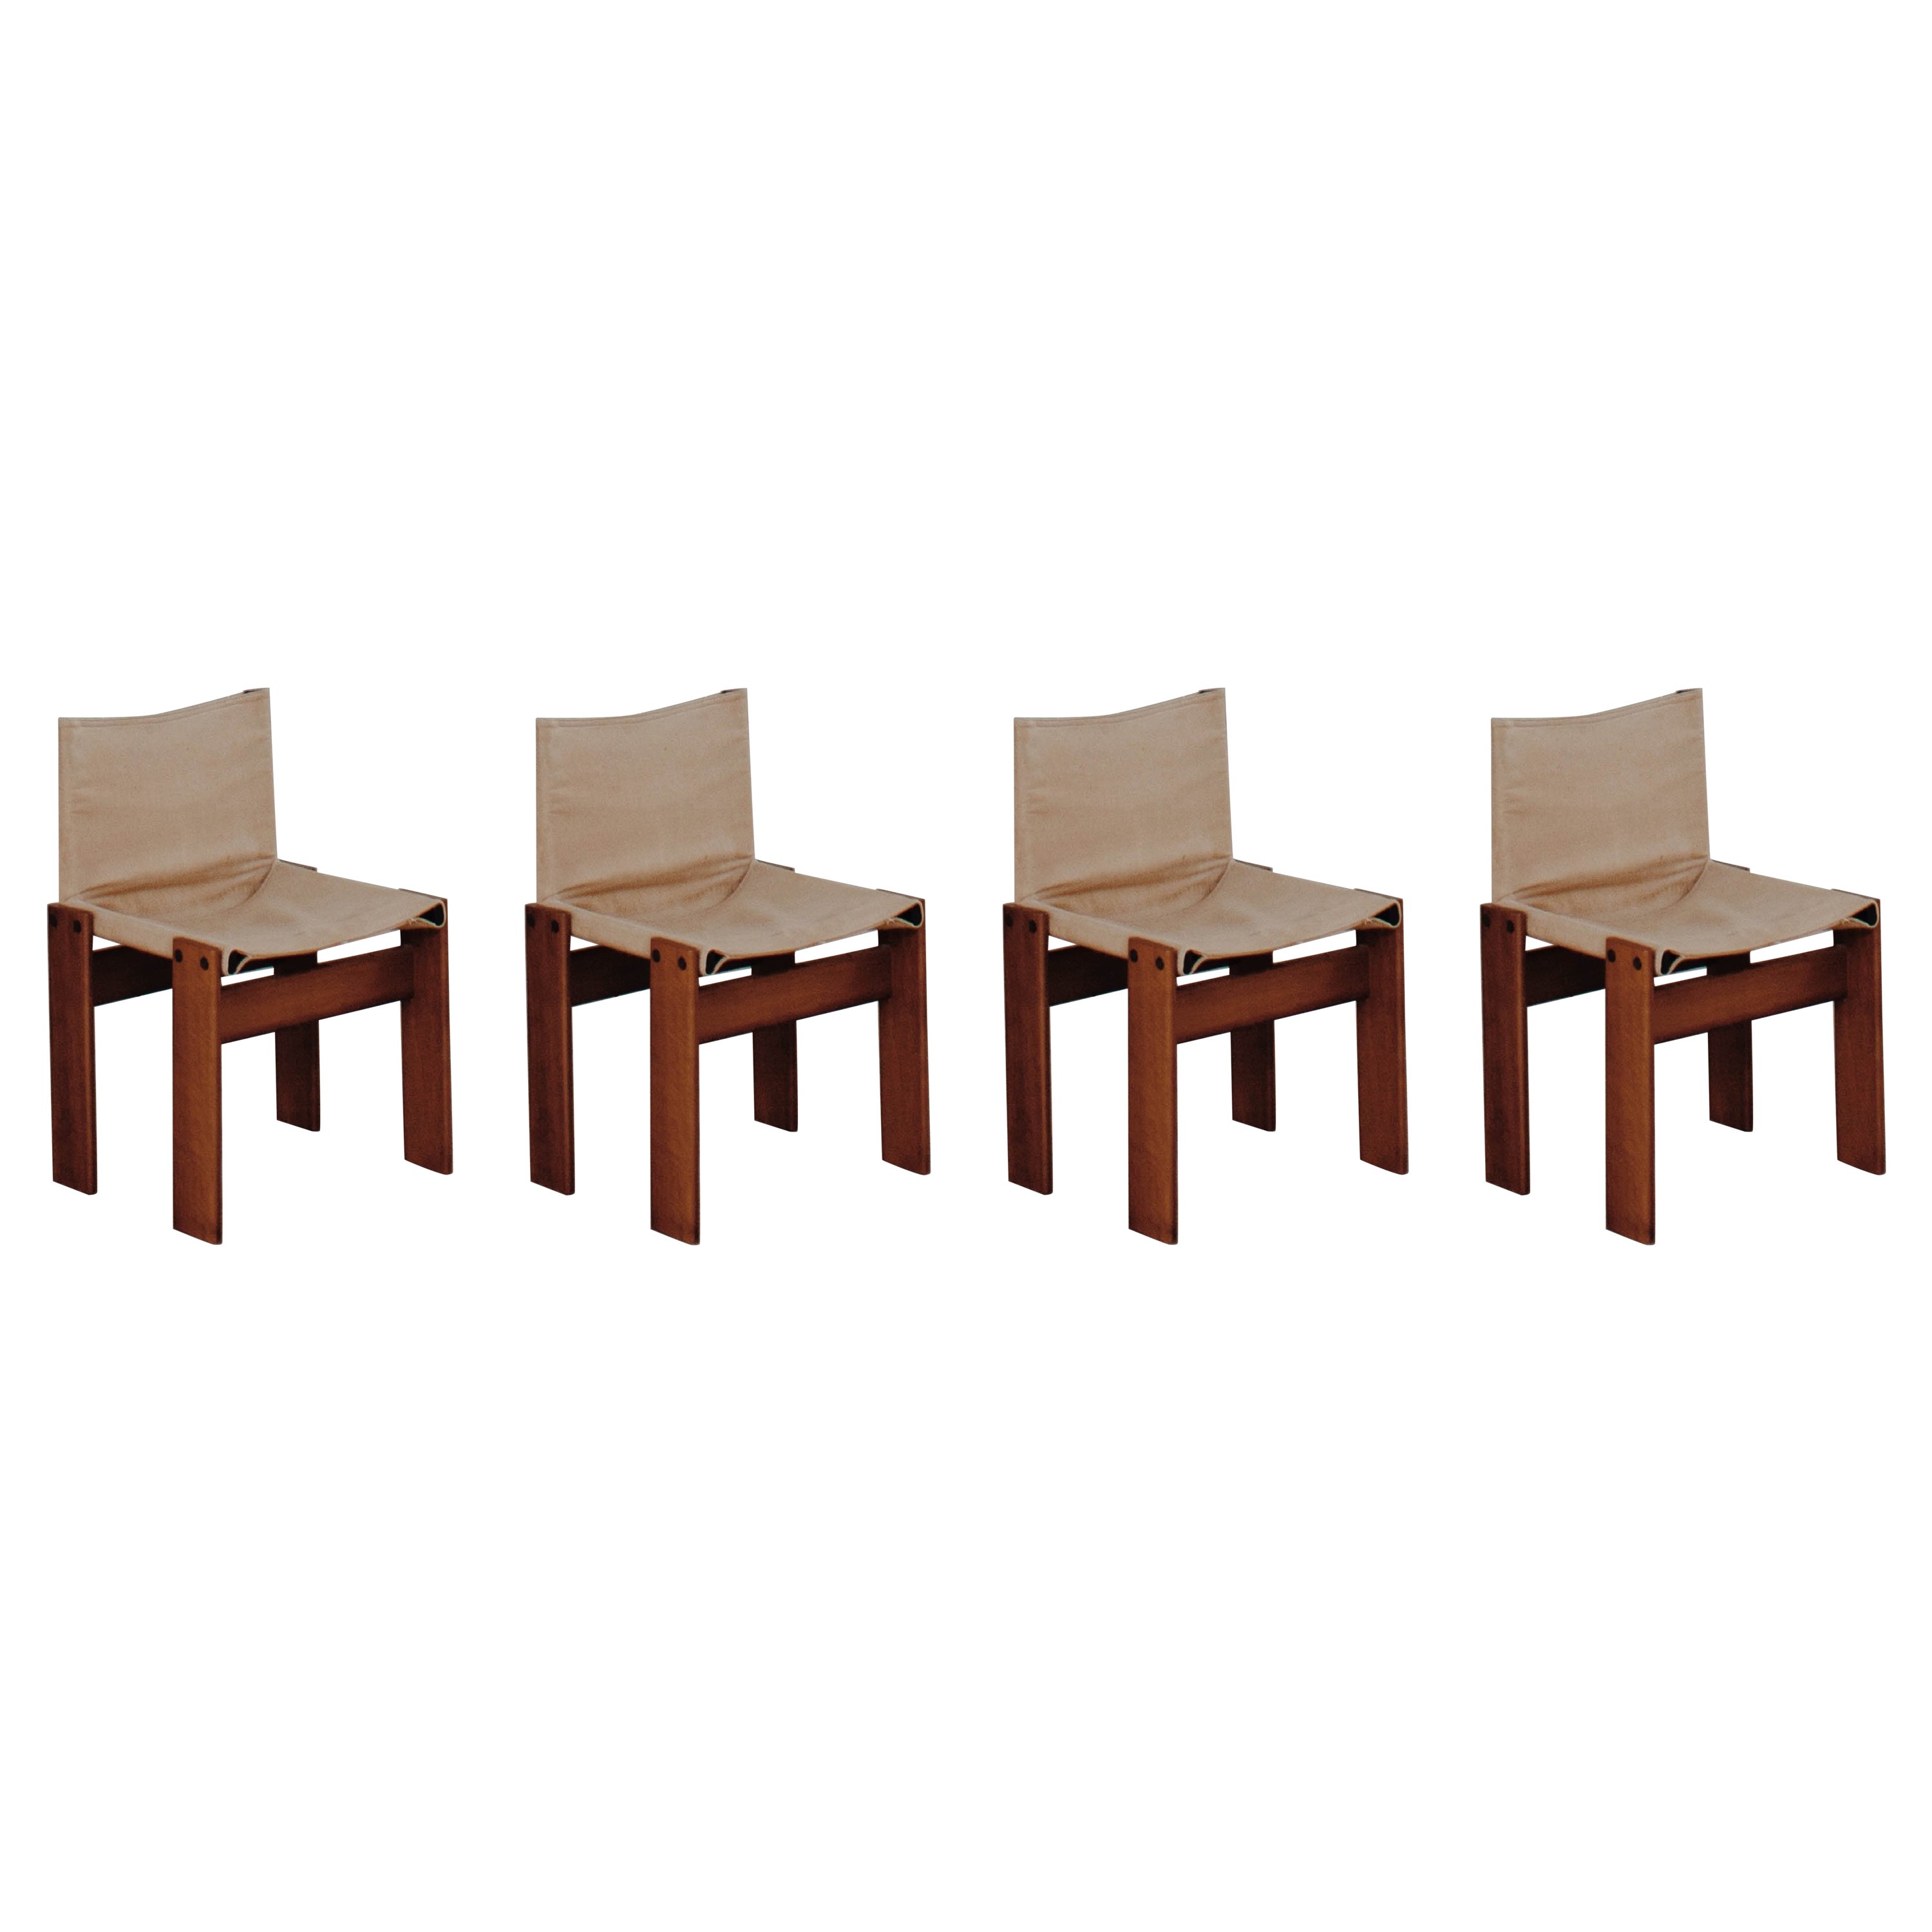 Afra & Tobia Scarpa "Monk" Chairs for Molteni, 1974, Set of 4